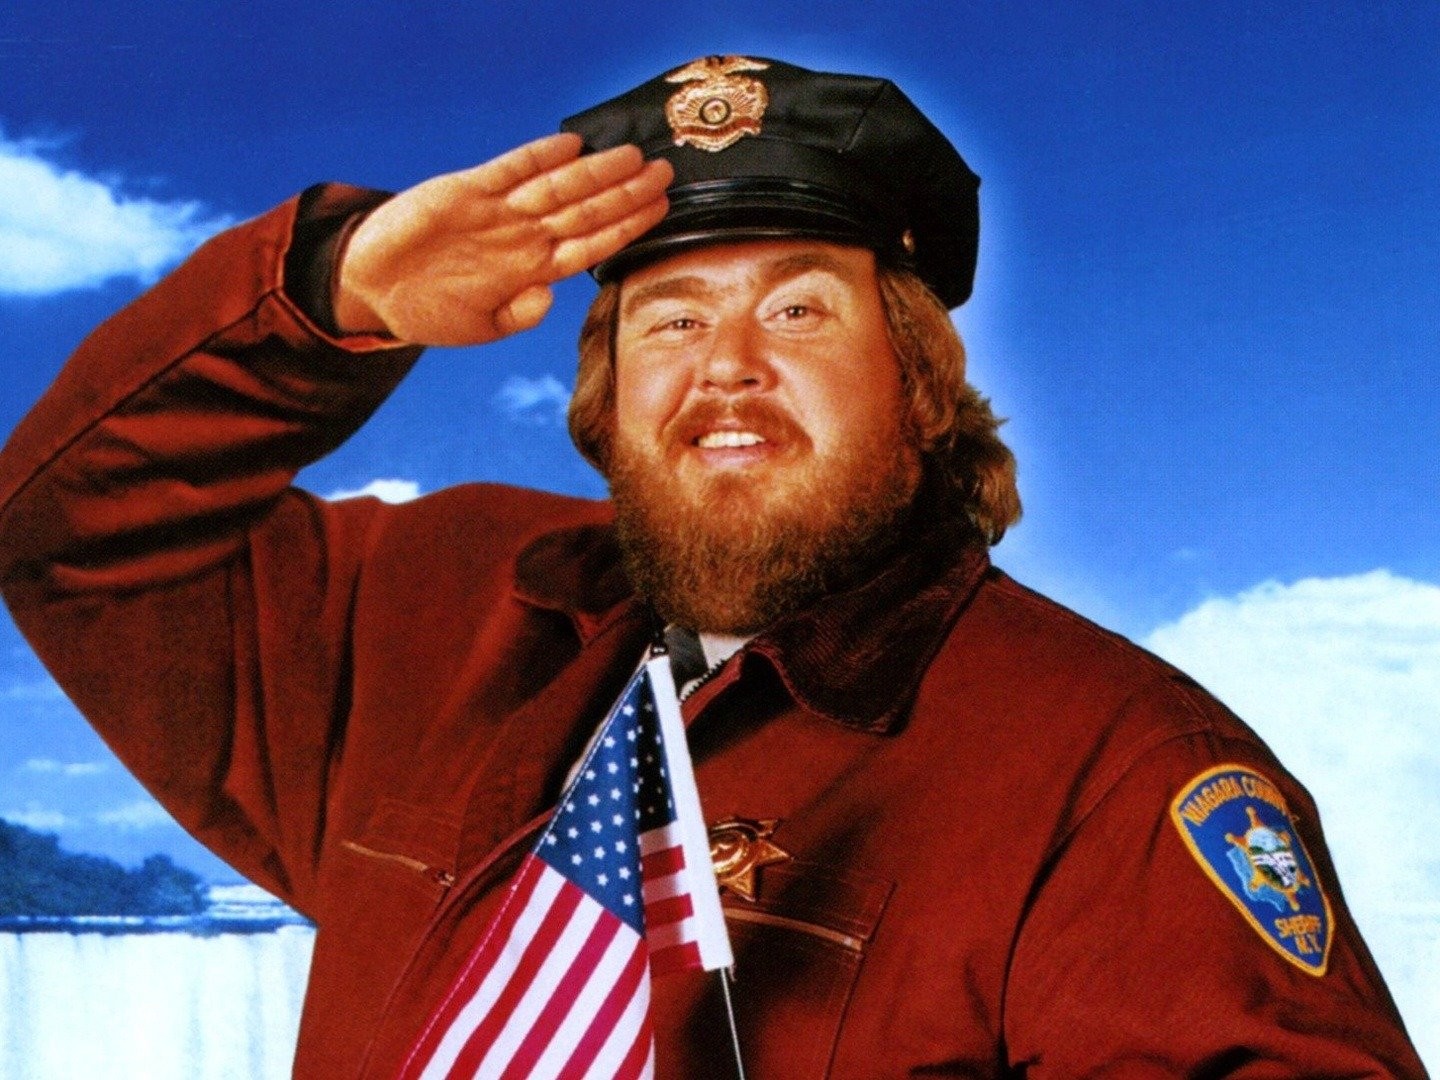 John Candy in Canadian Bacon.